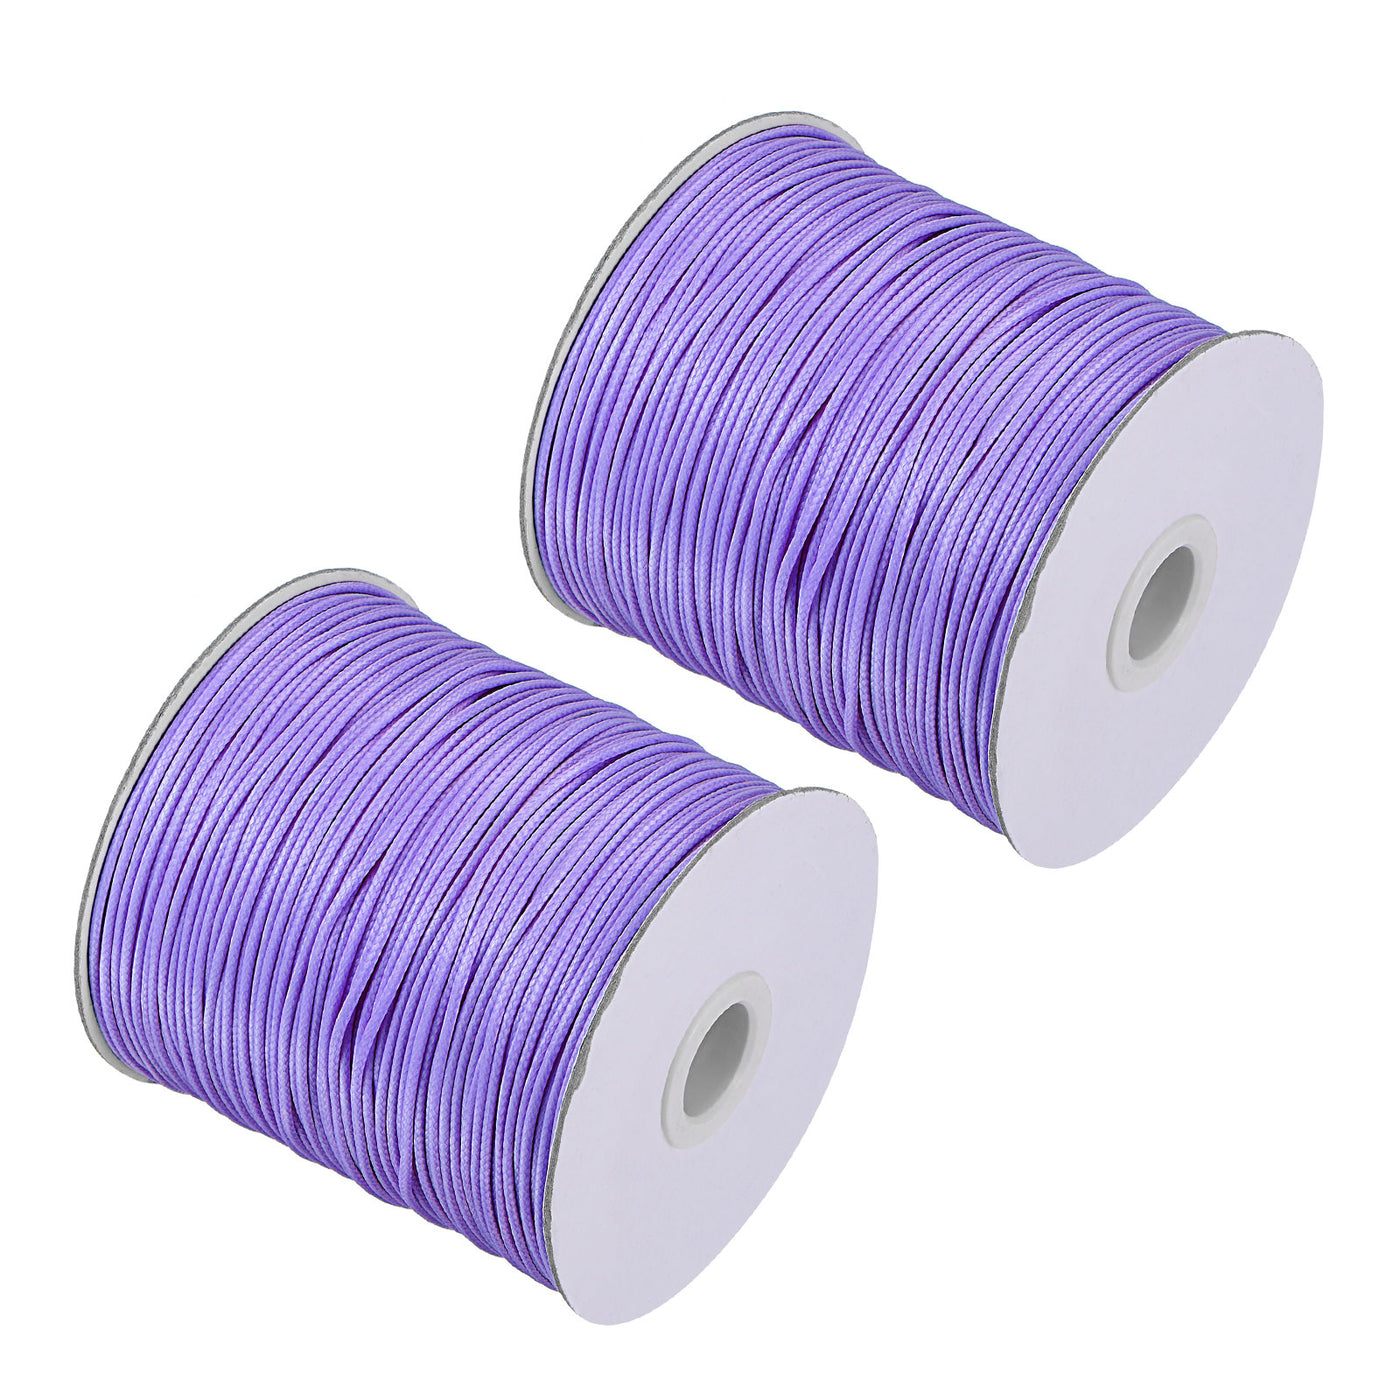 uxcell Uxcell 2pcs 1.5mm Waxed Polyester String 158M 172-Yard Bead Crafting Rope, Light Purple